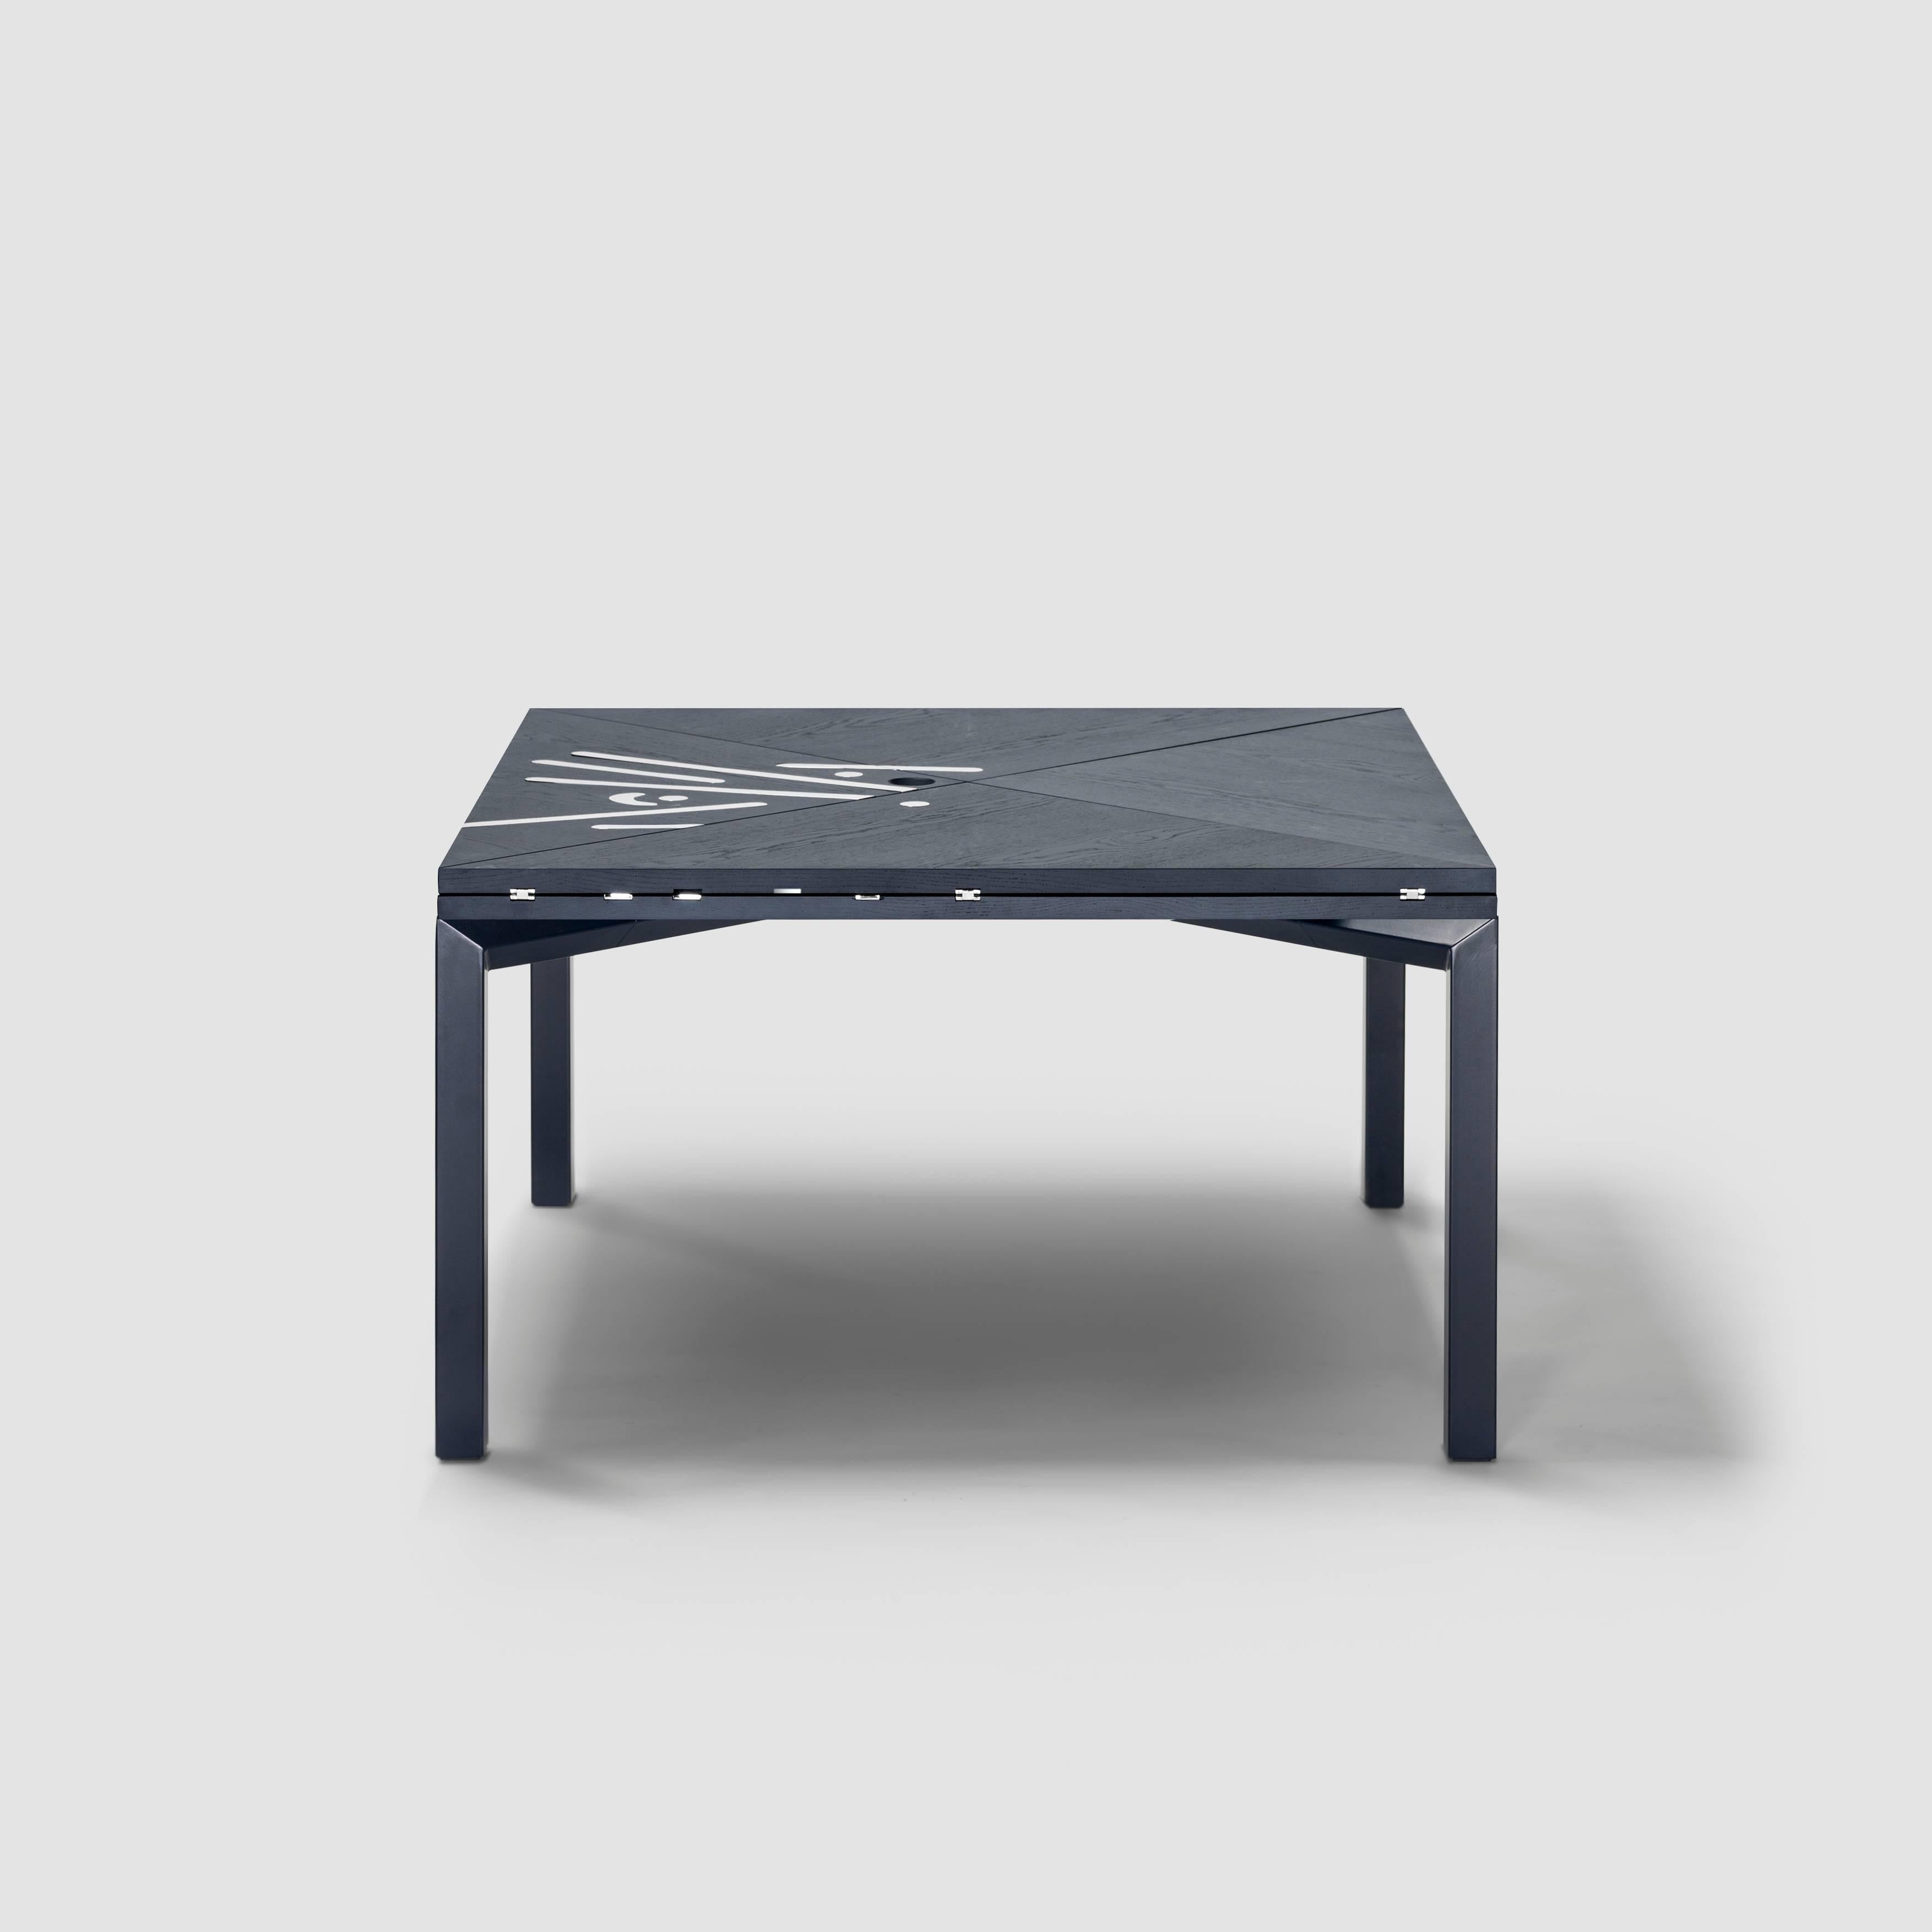 Mid-Century Modern Limited Edition Alella Table by Lluis Clotet